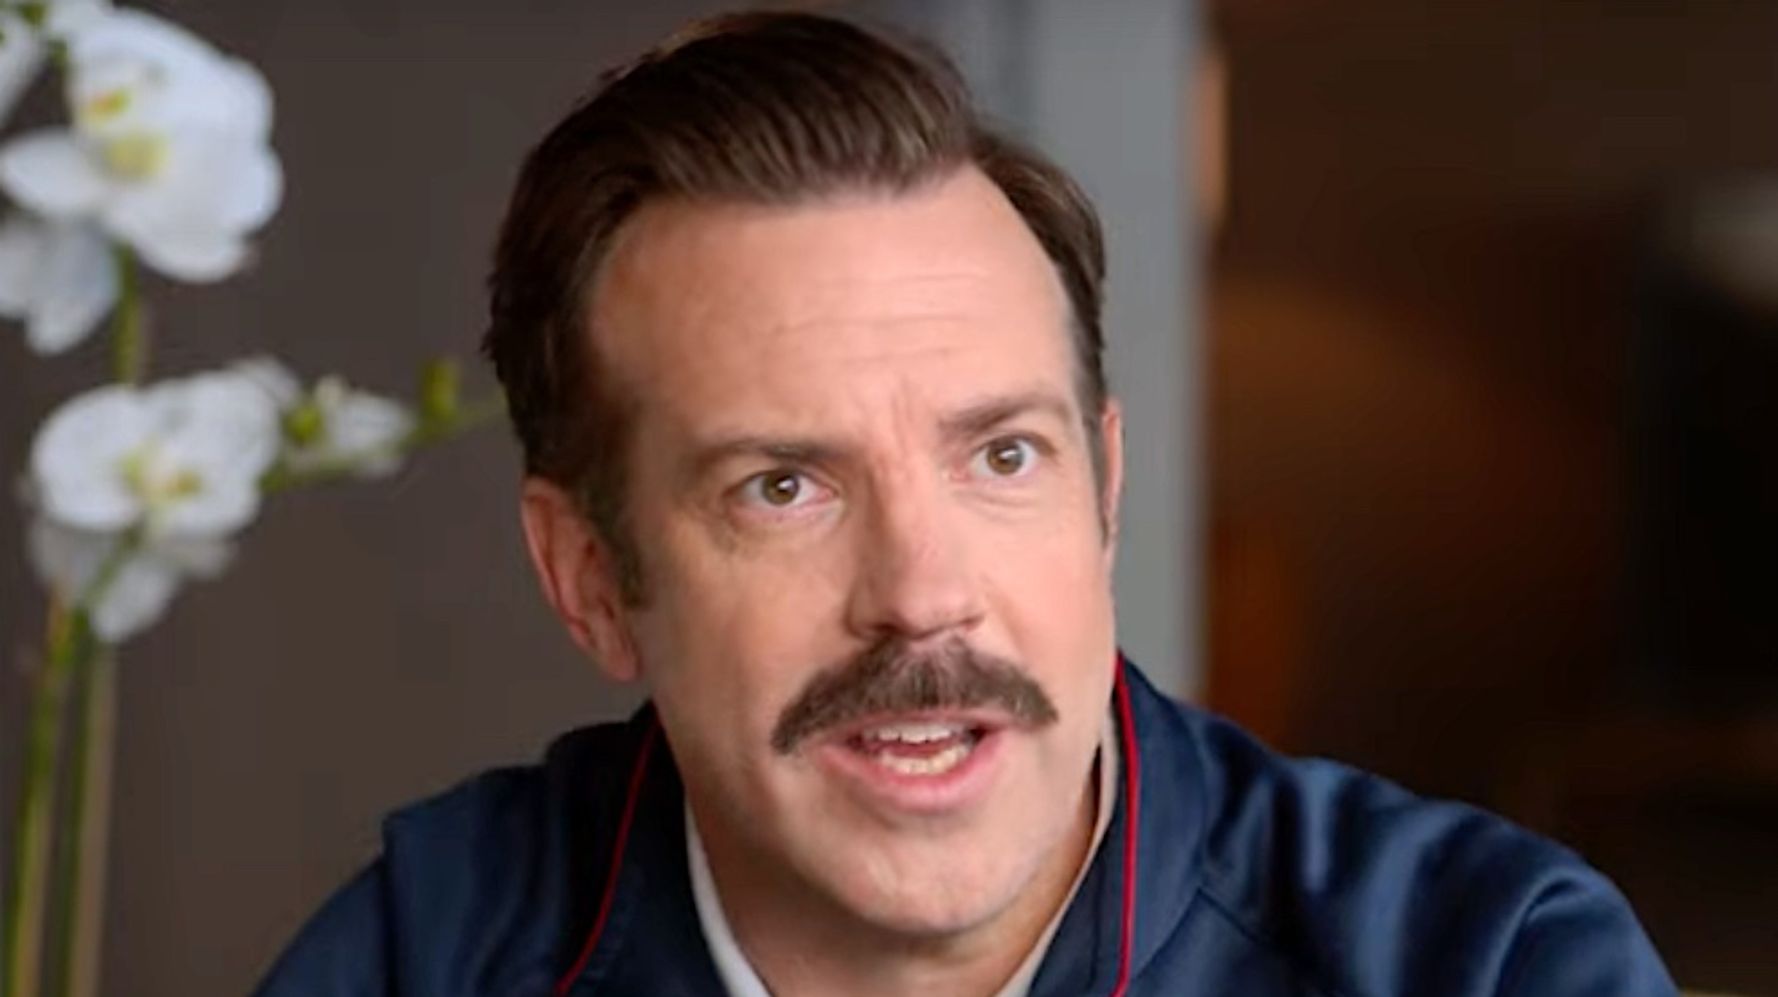 The first look at “Ted Lasso” Season 2 reveals a new addition to the cast